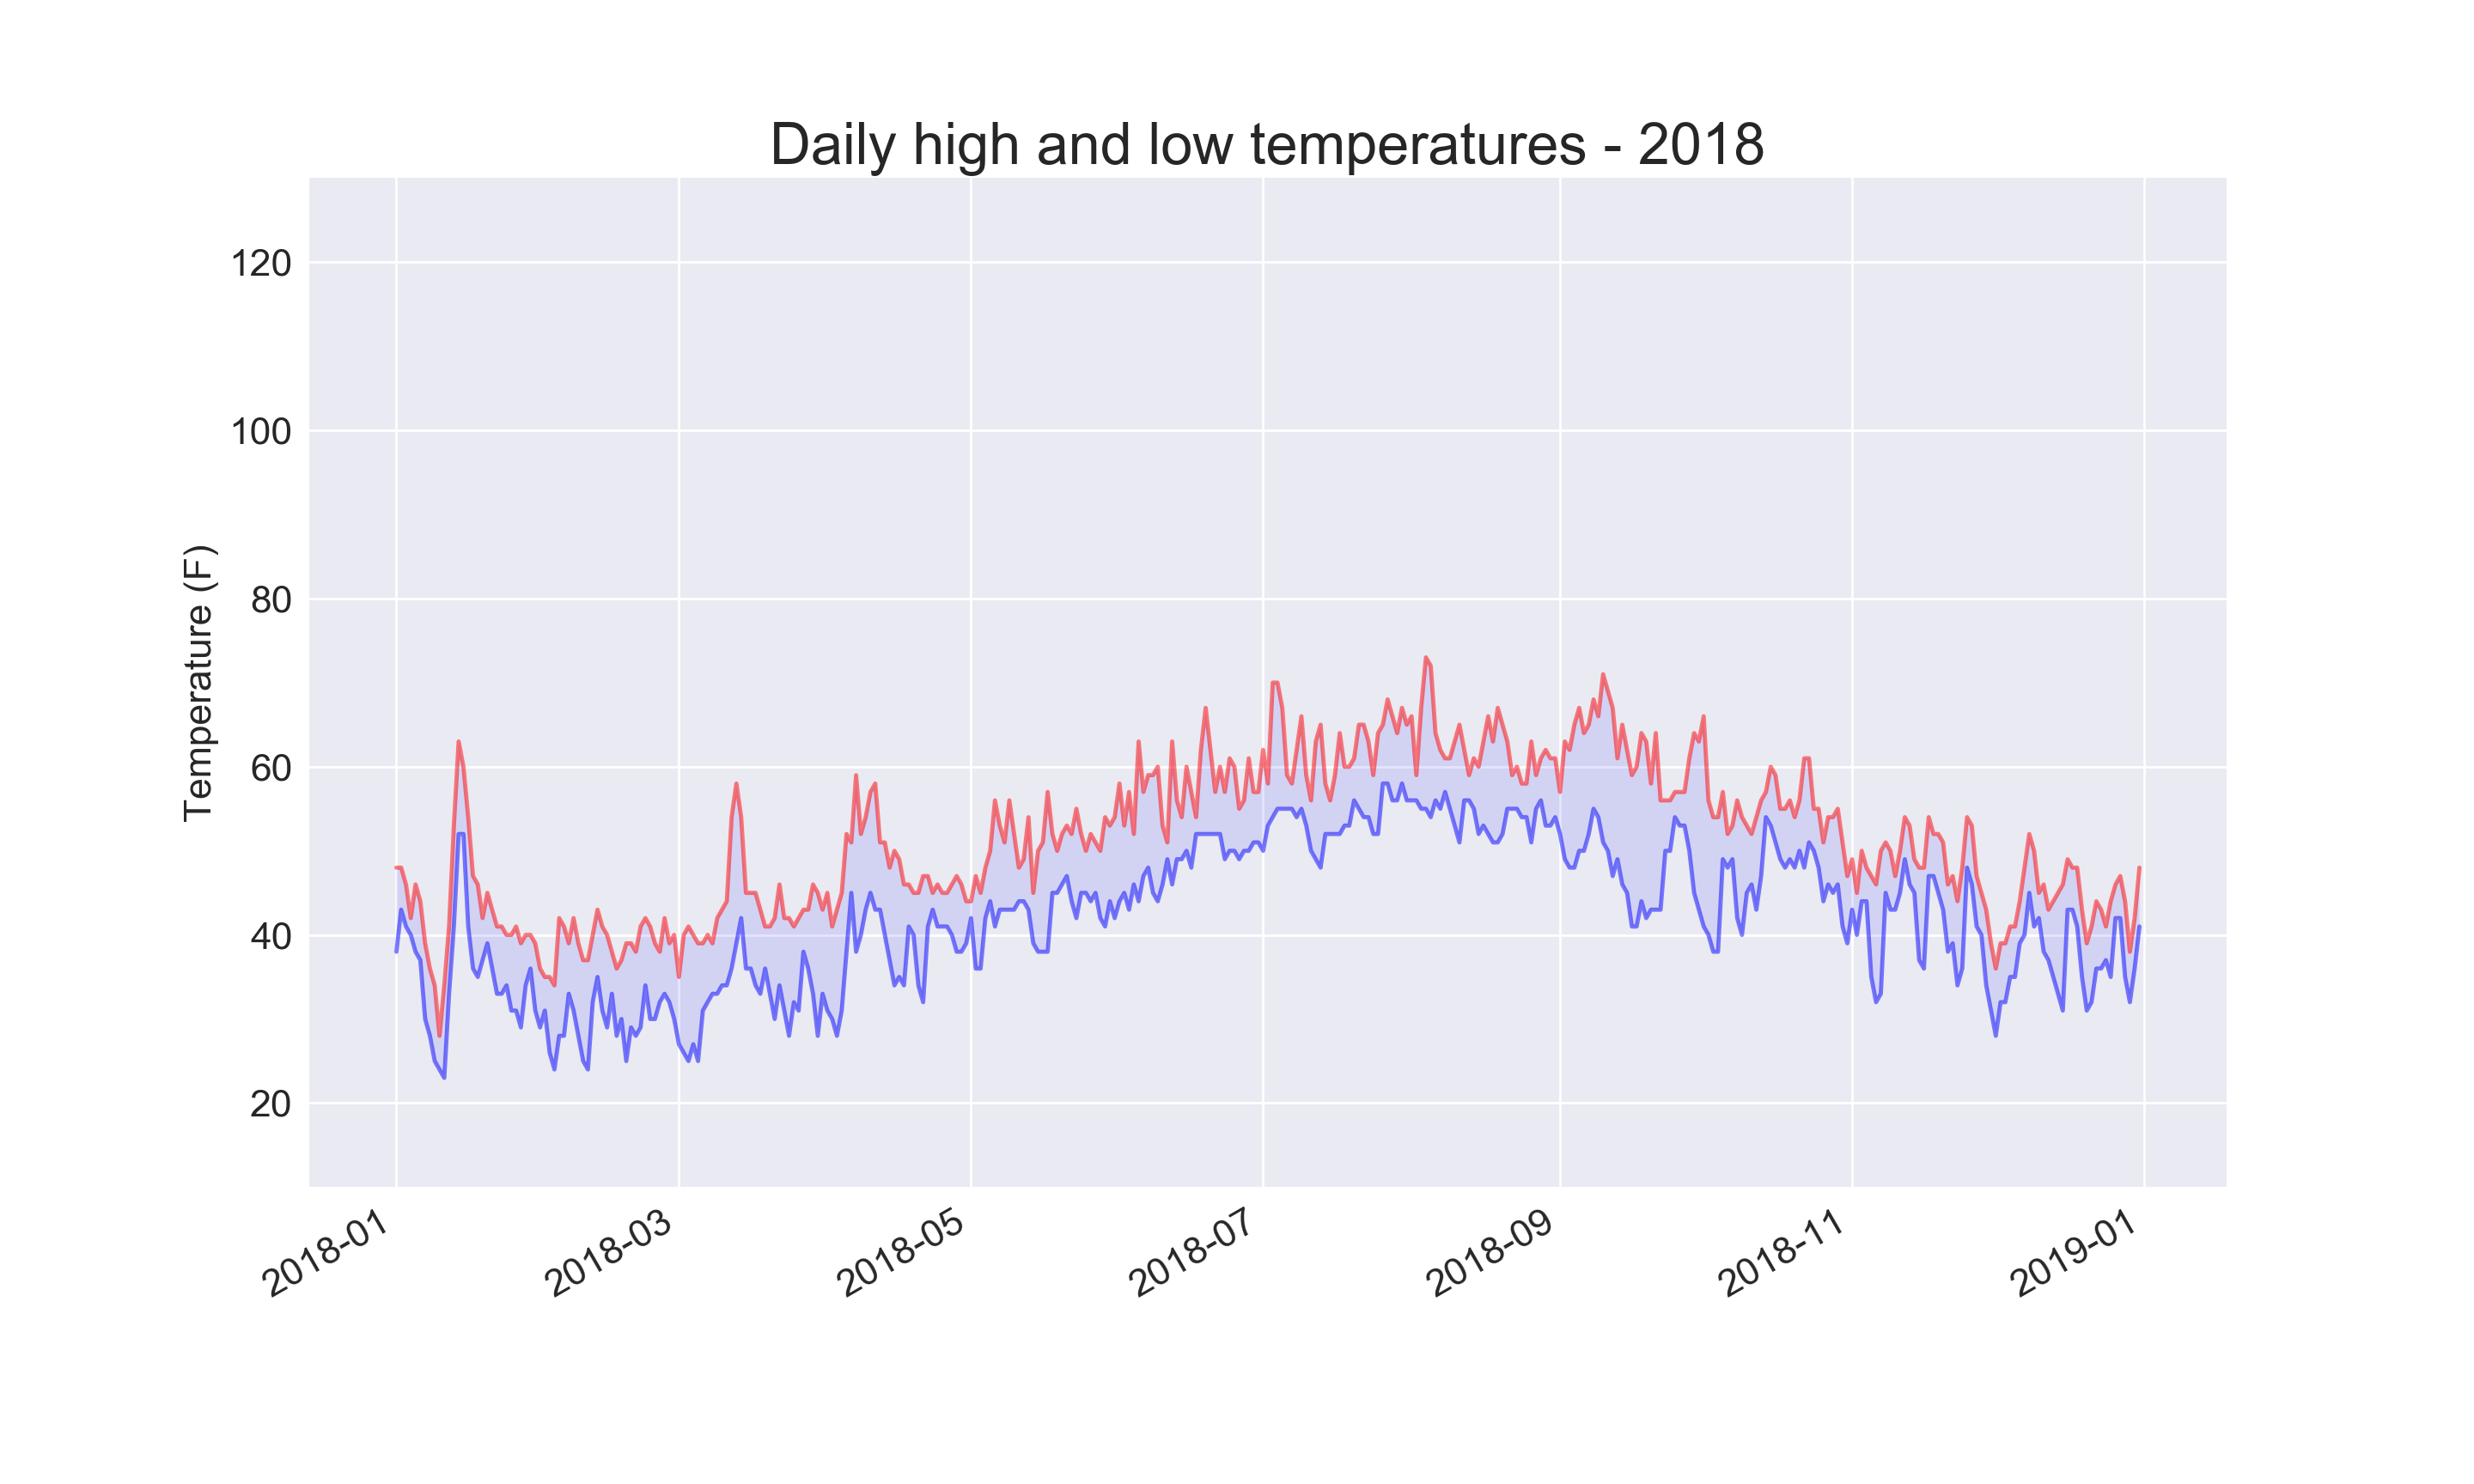 Daily high and low temperatures for Sitka, Alaska in 2018